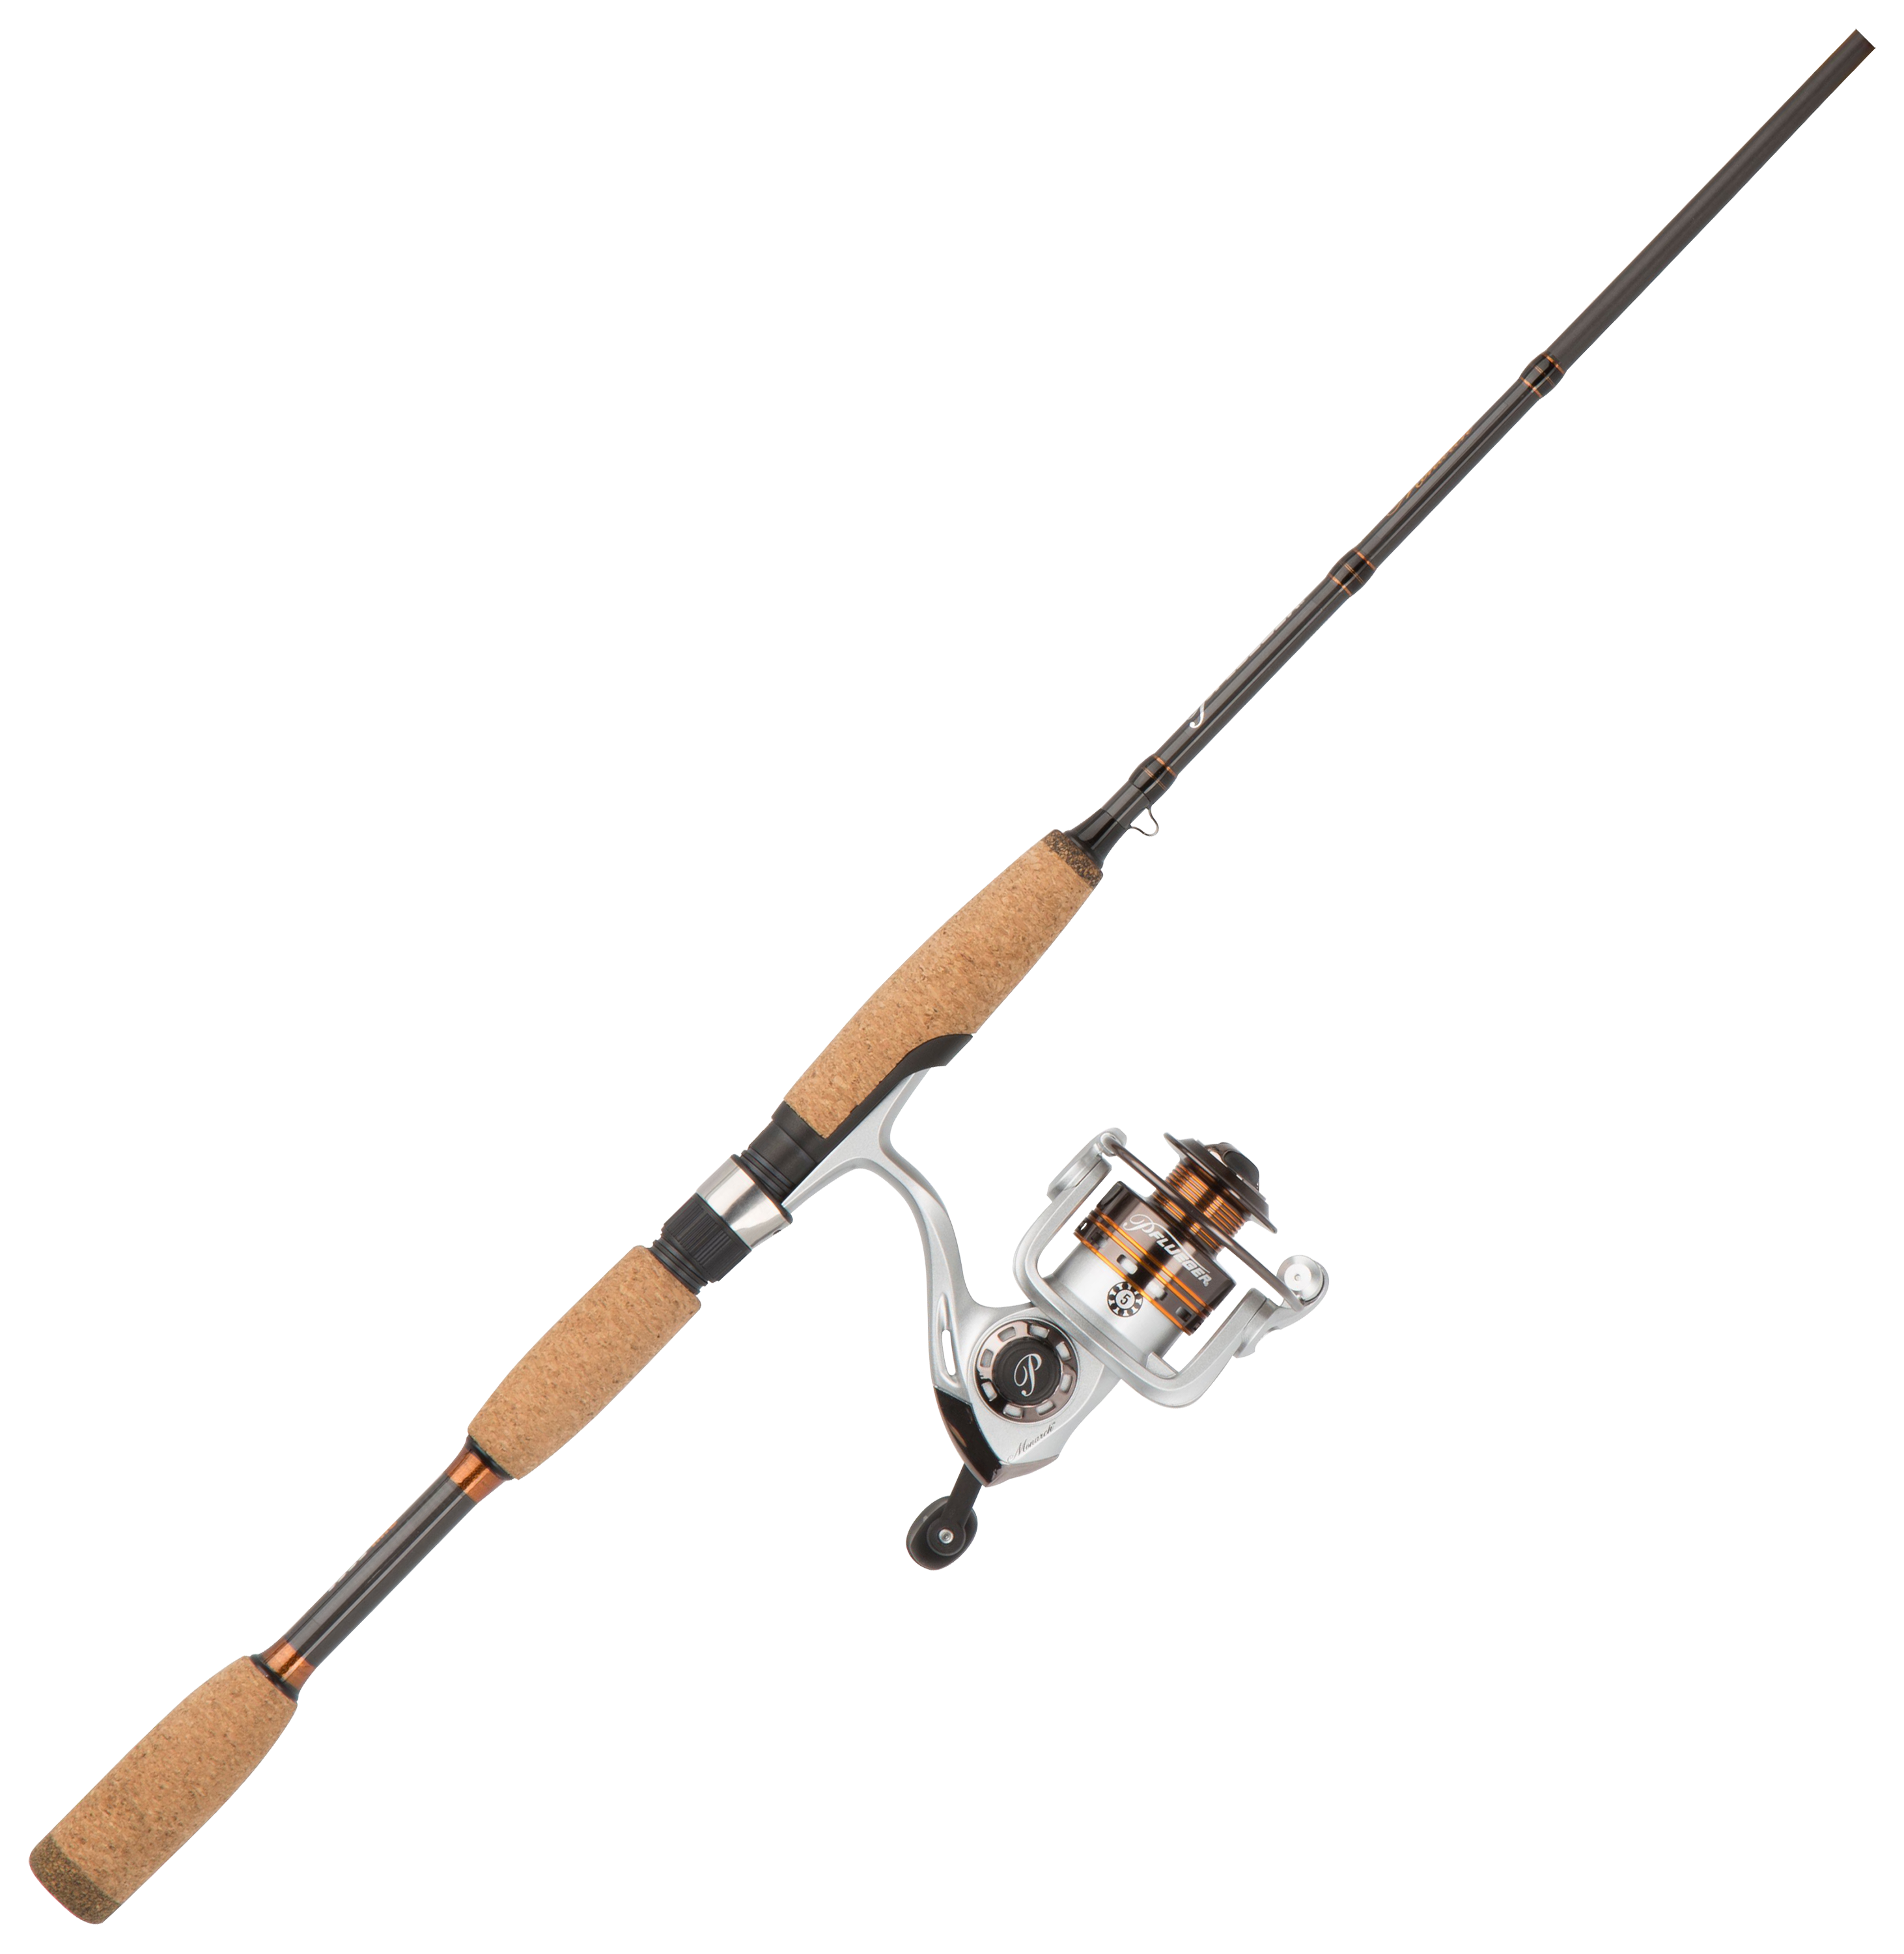 Bass Pro Shops Micro Lite Spinning Combo